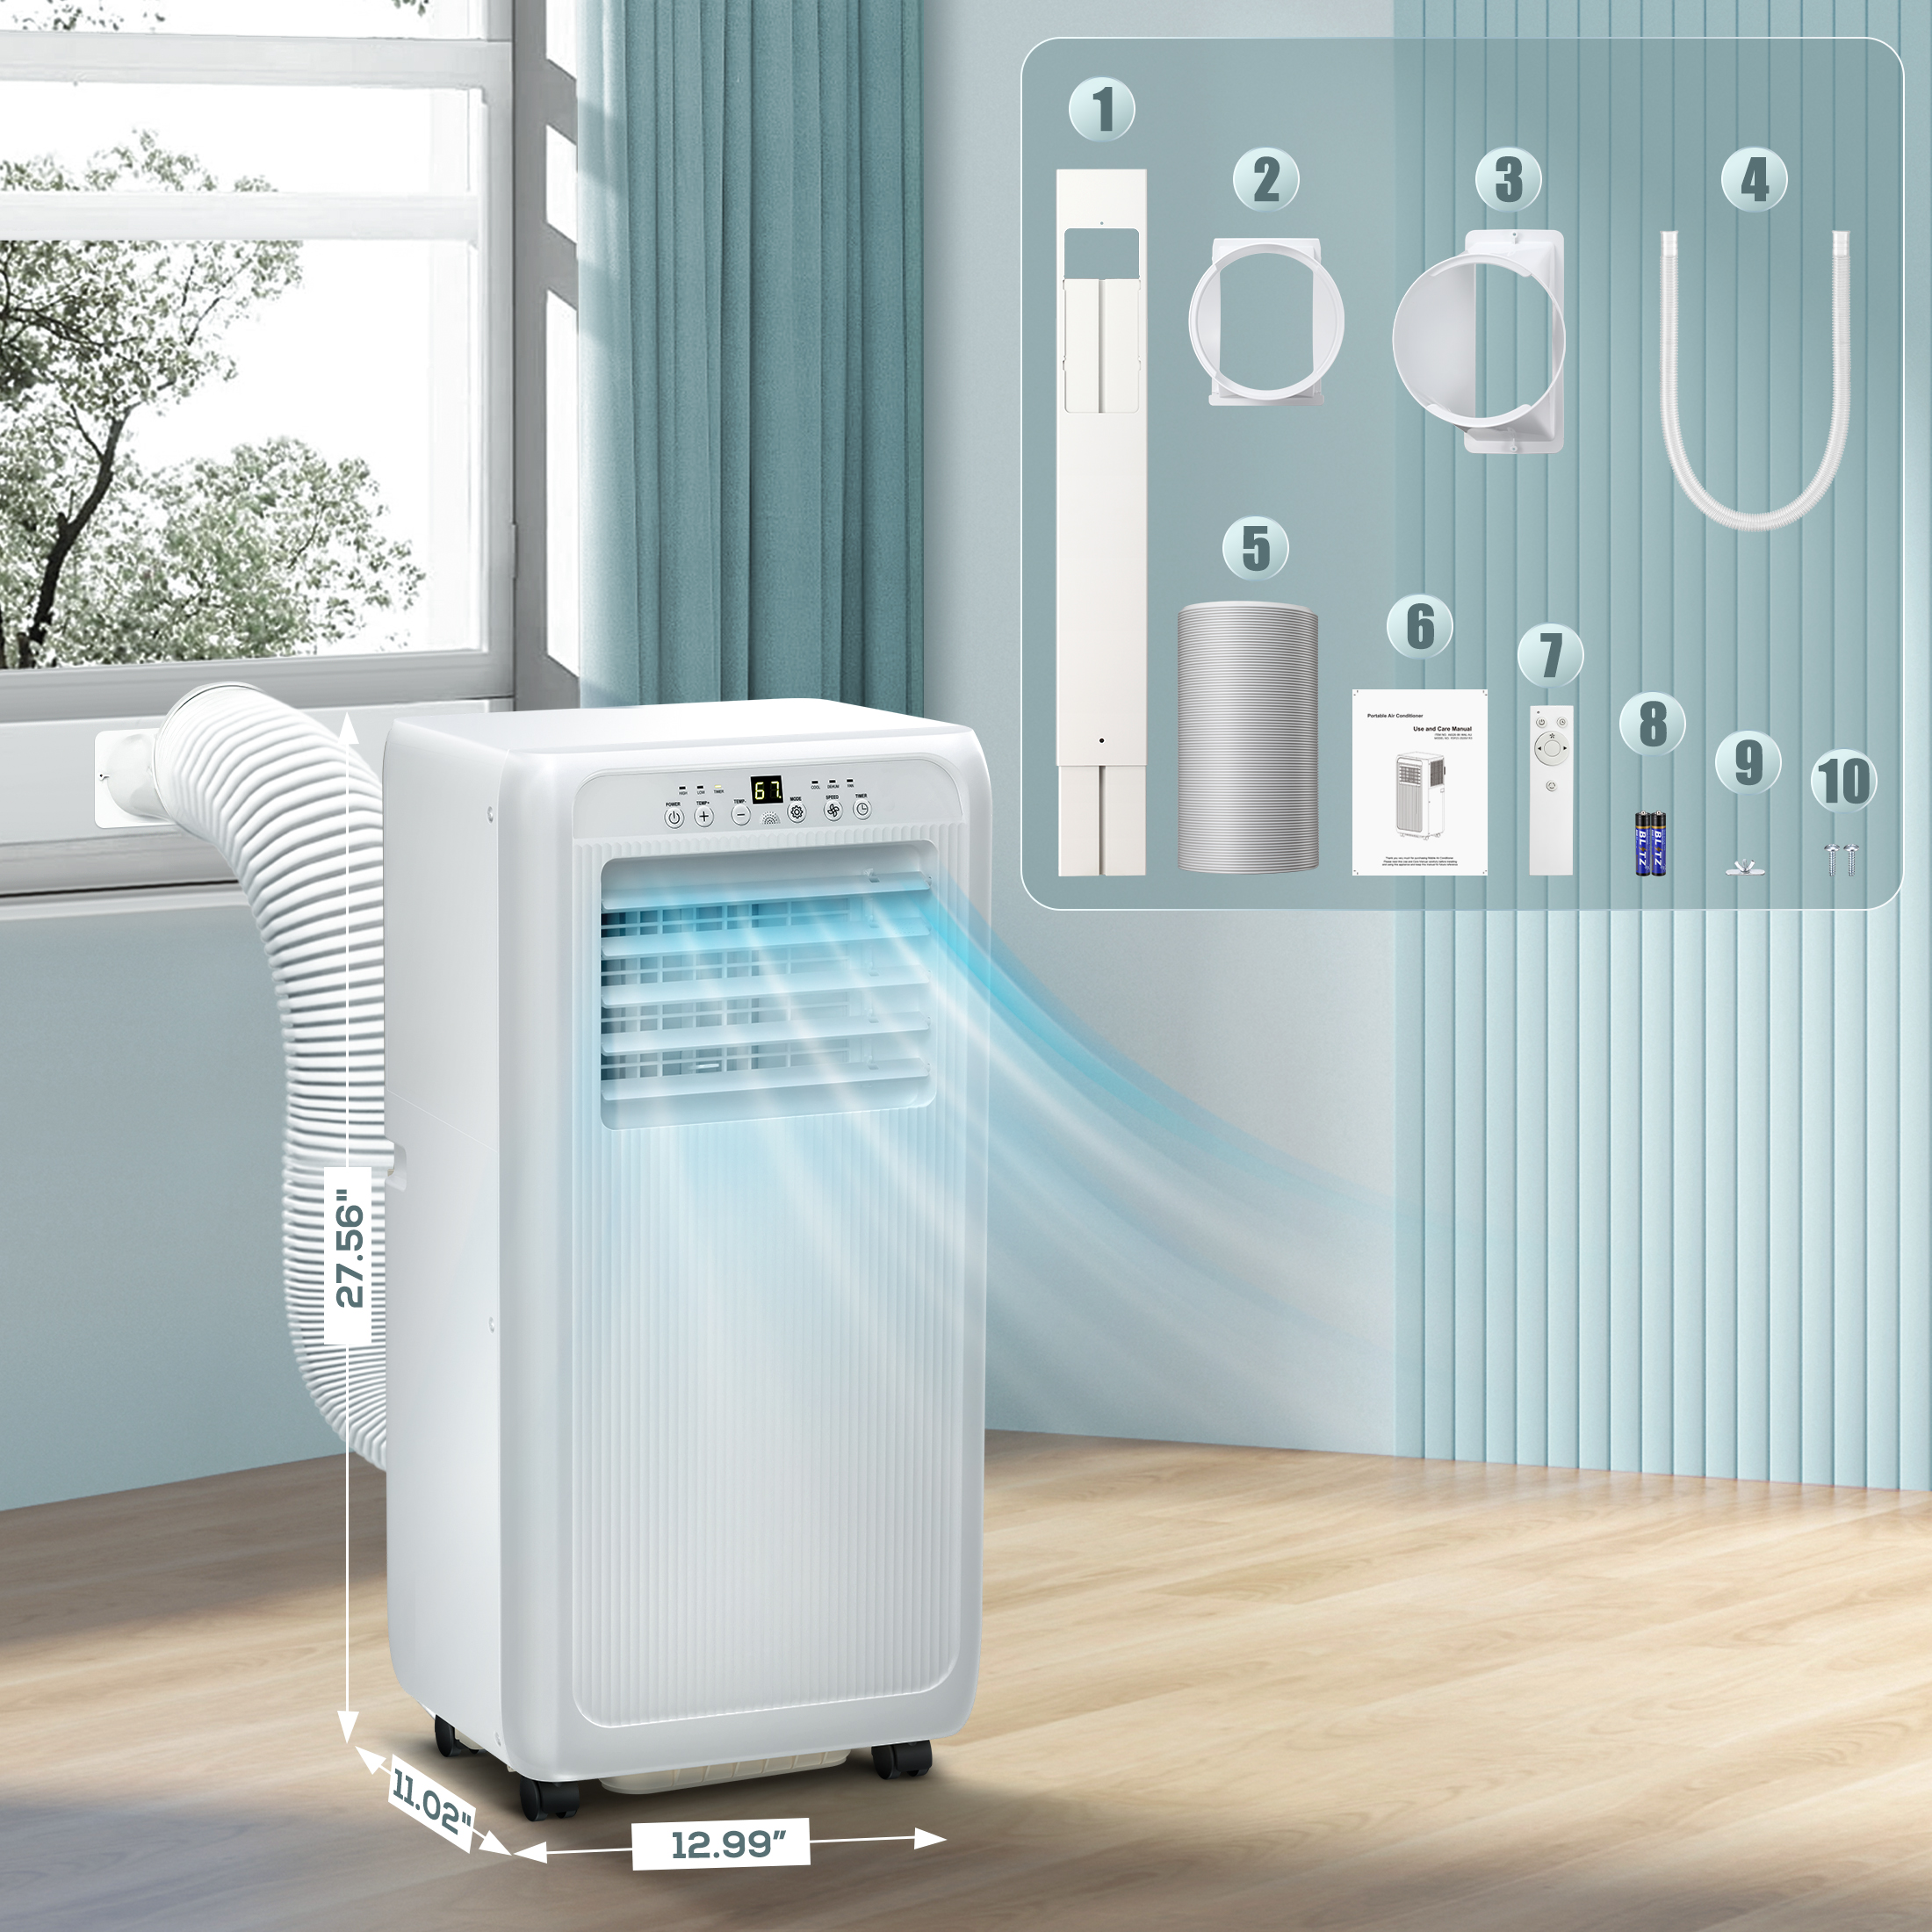 Auseo 6000BTU (10000 BTU ASHARE) Portable Air Conditioner, Dehumidifier, Fan, 3 in 1 AC with 24-Hour Timer - image 3 of 7